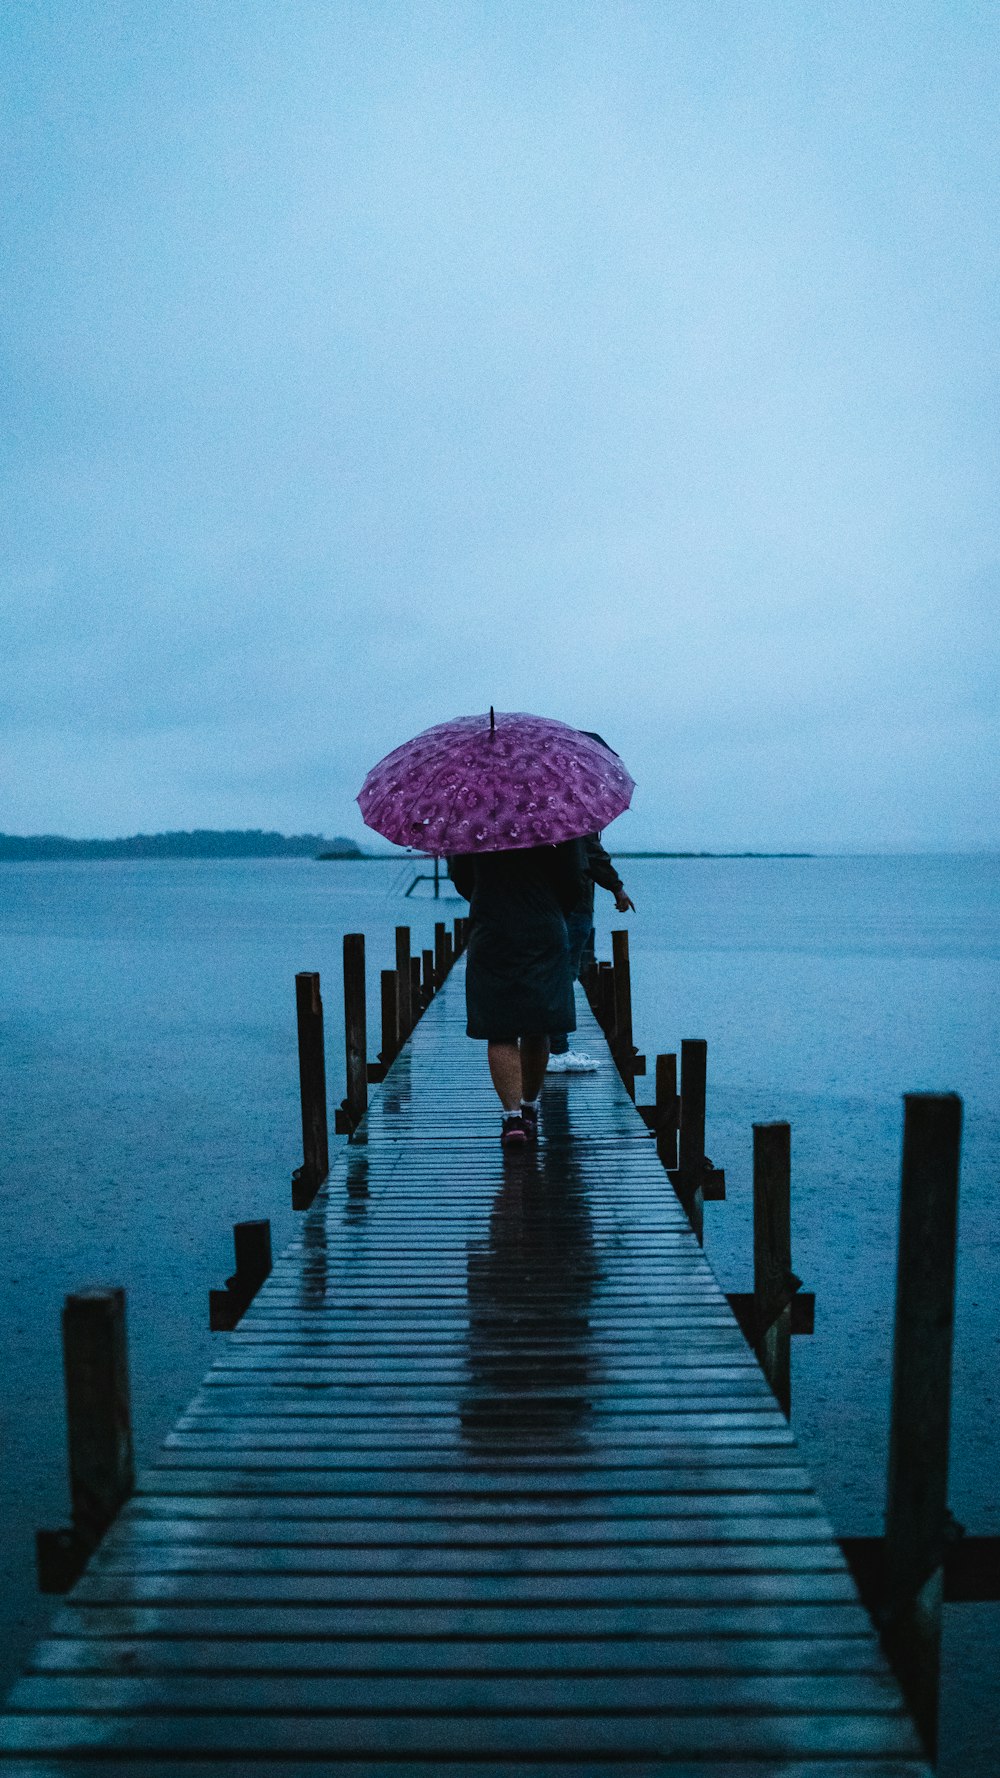 person carrying umbrella walking on dock